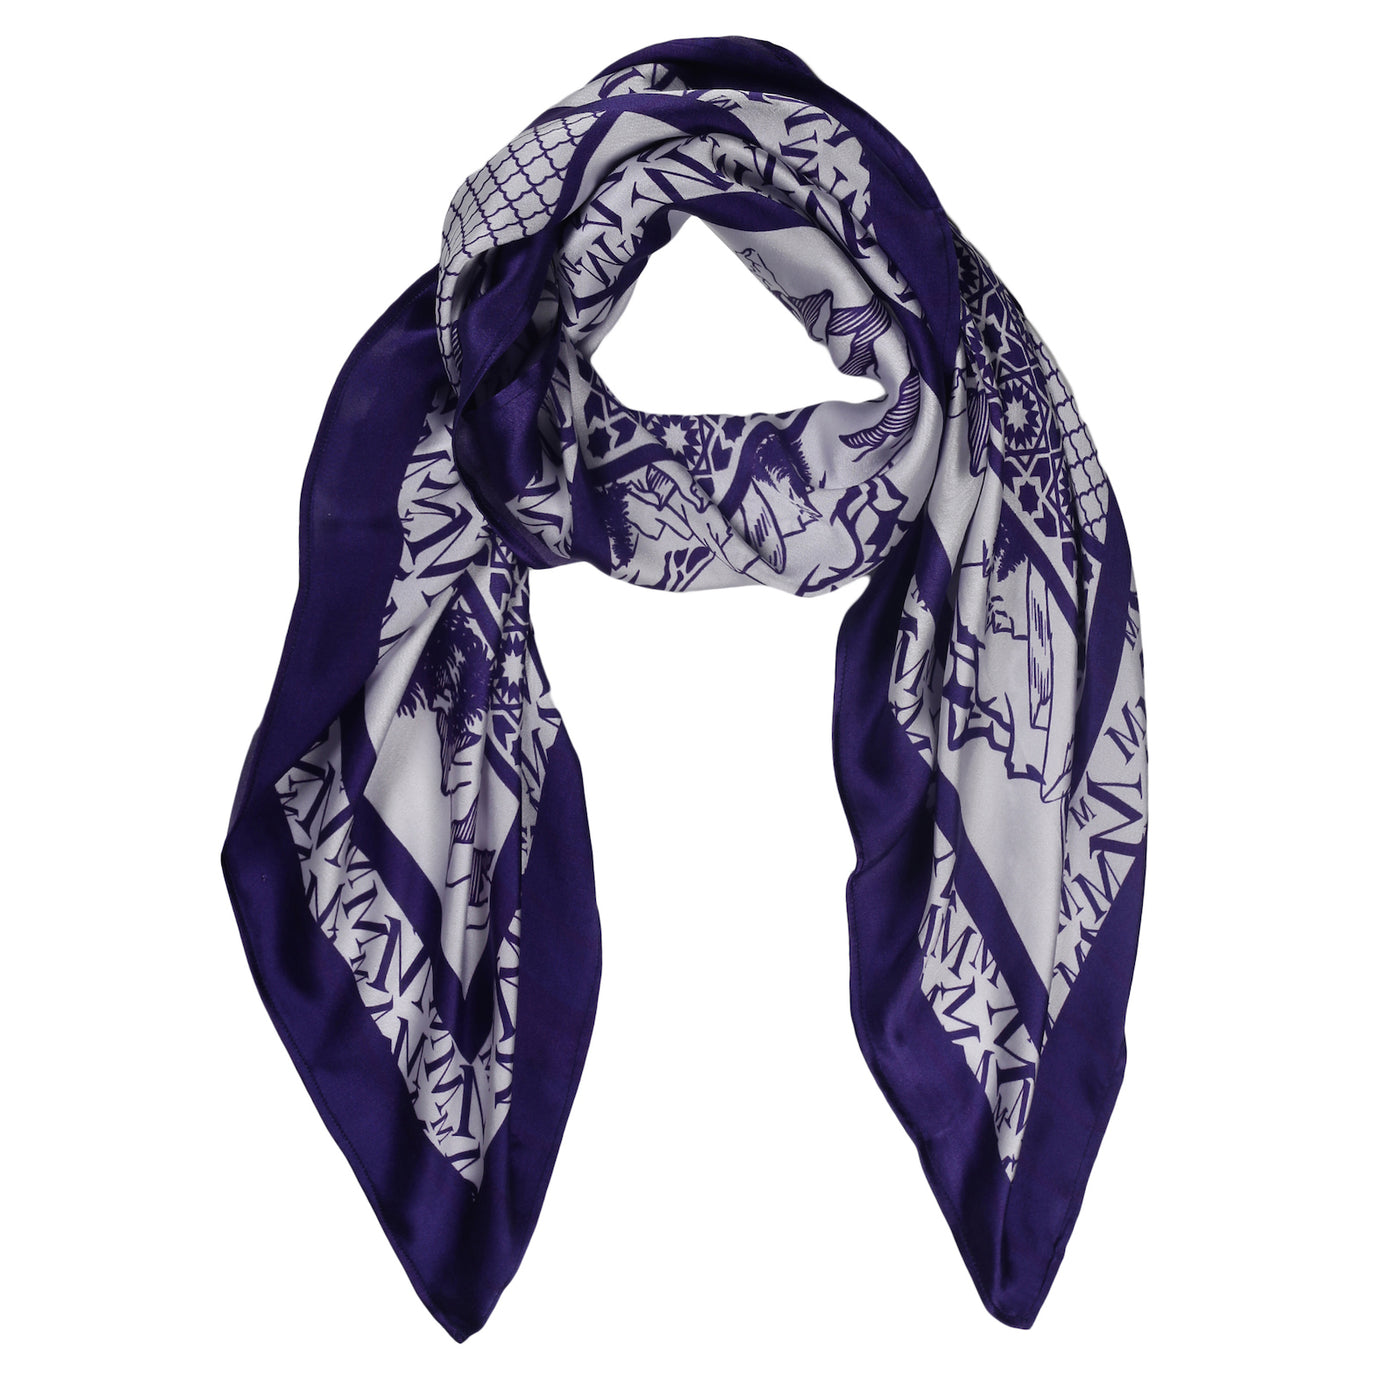 The Vignette Valley Scarf